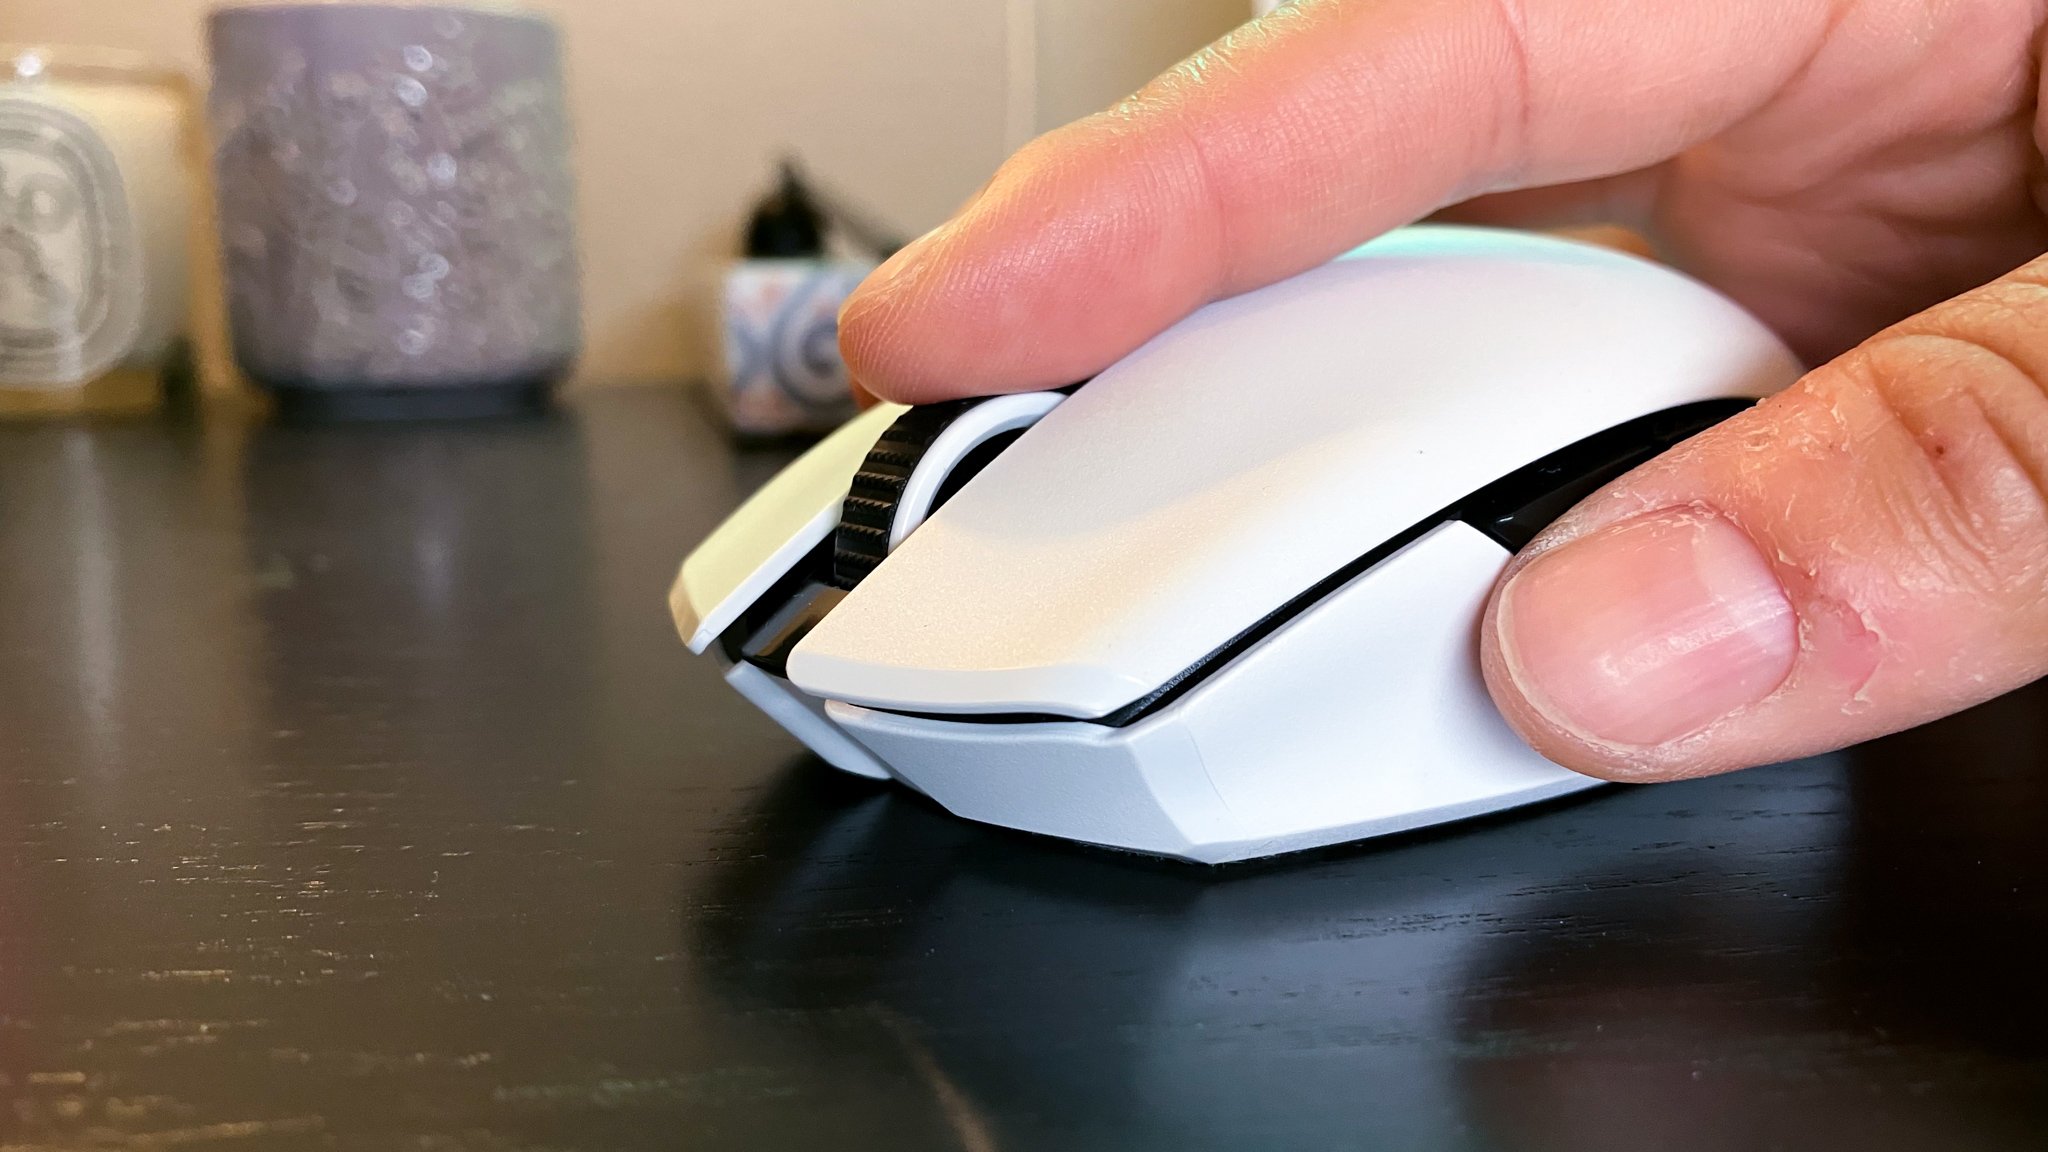 Razer Orochi V2 review – a great travel mouse with customisability